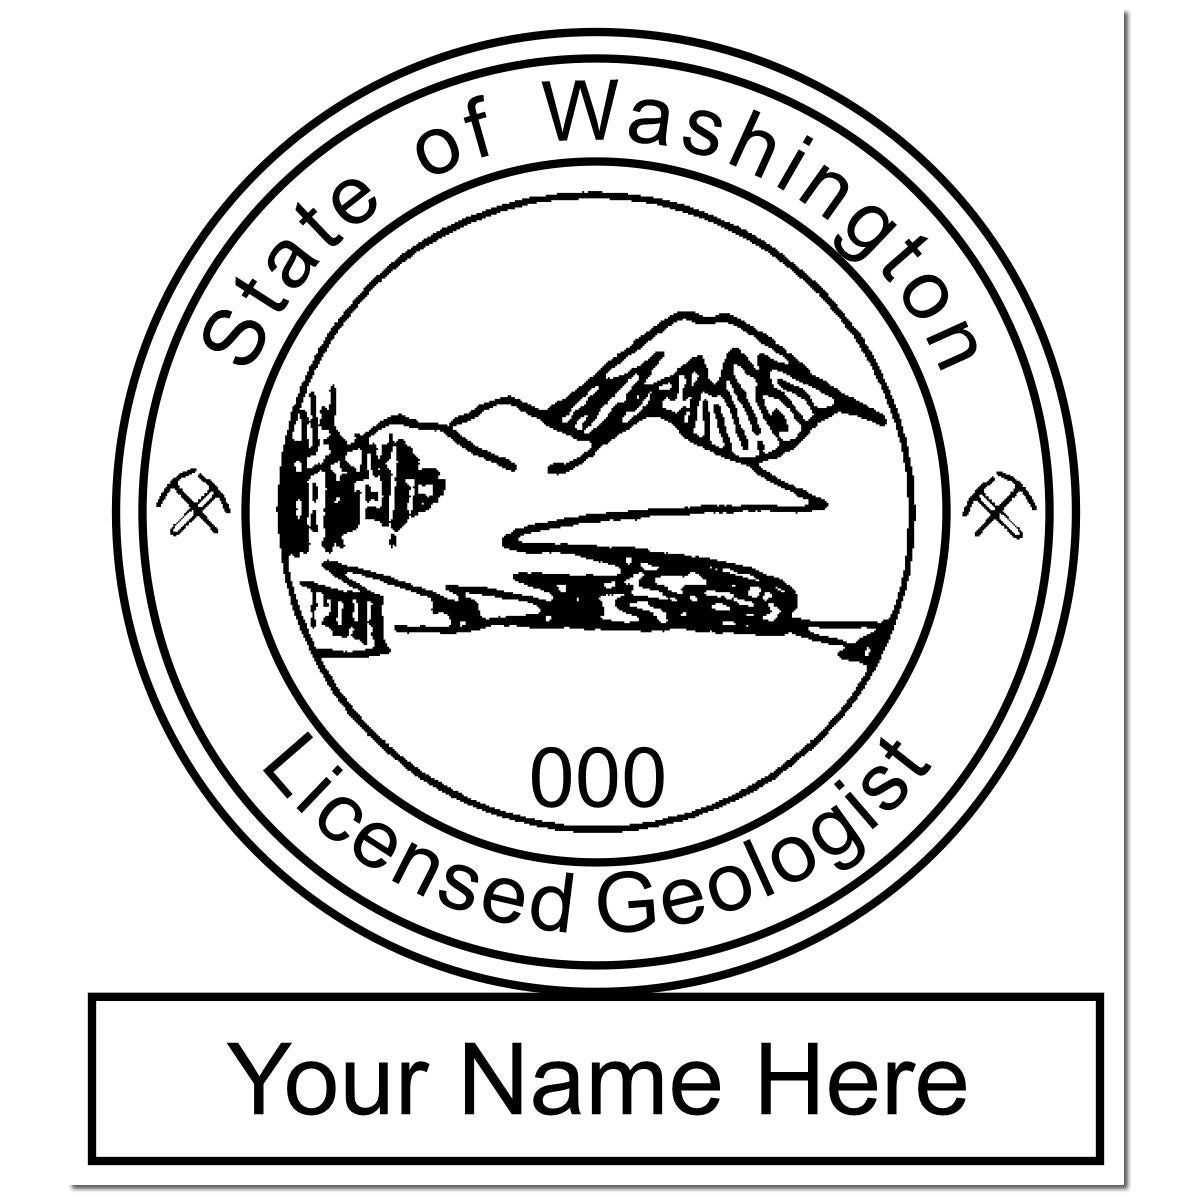 An alternative view of the Premium MaxLight Pre-Inked Washington Geology Stamp stamped on a sheet of paper showing the image in use